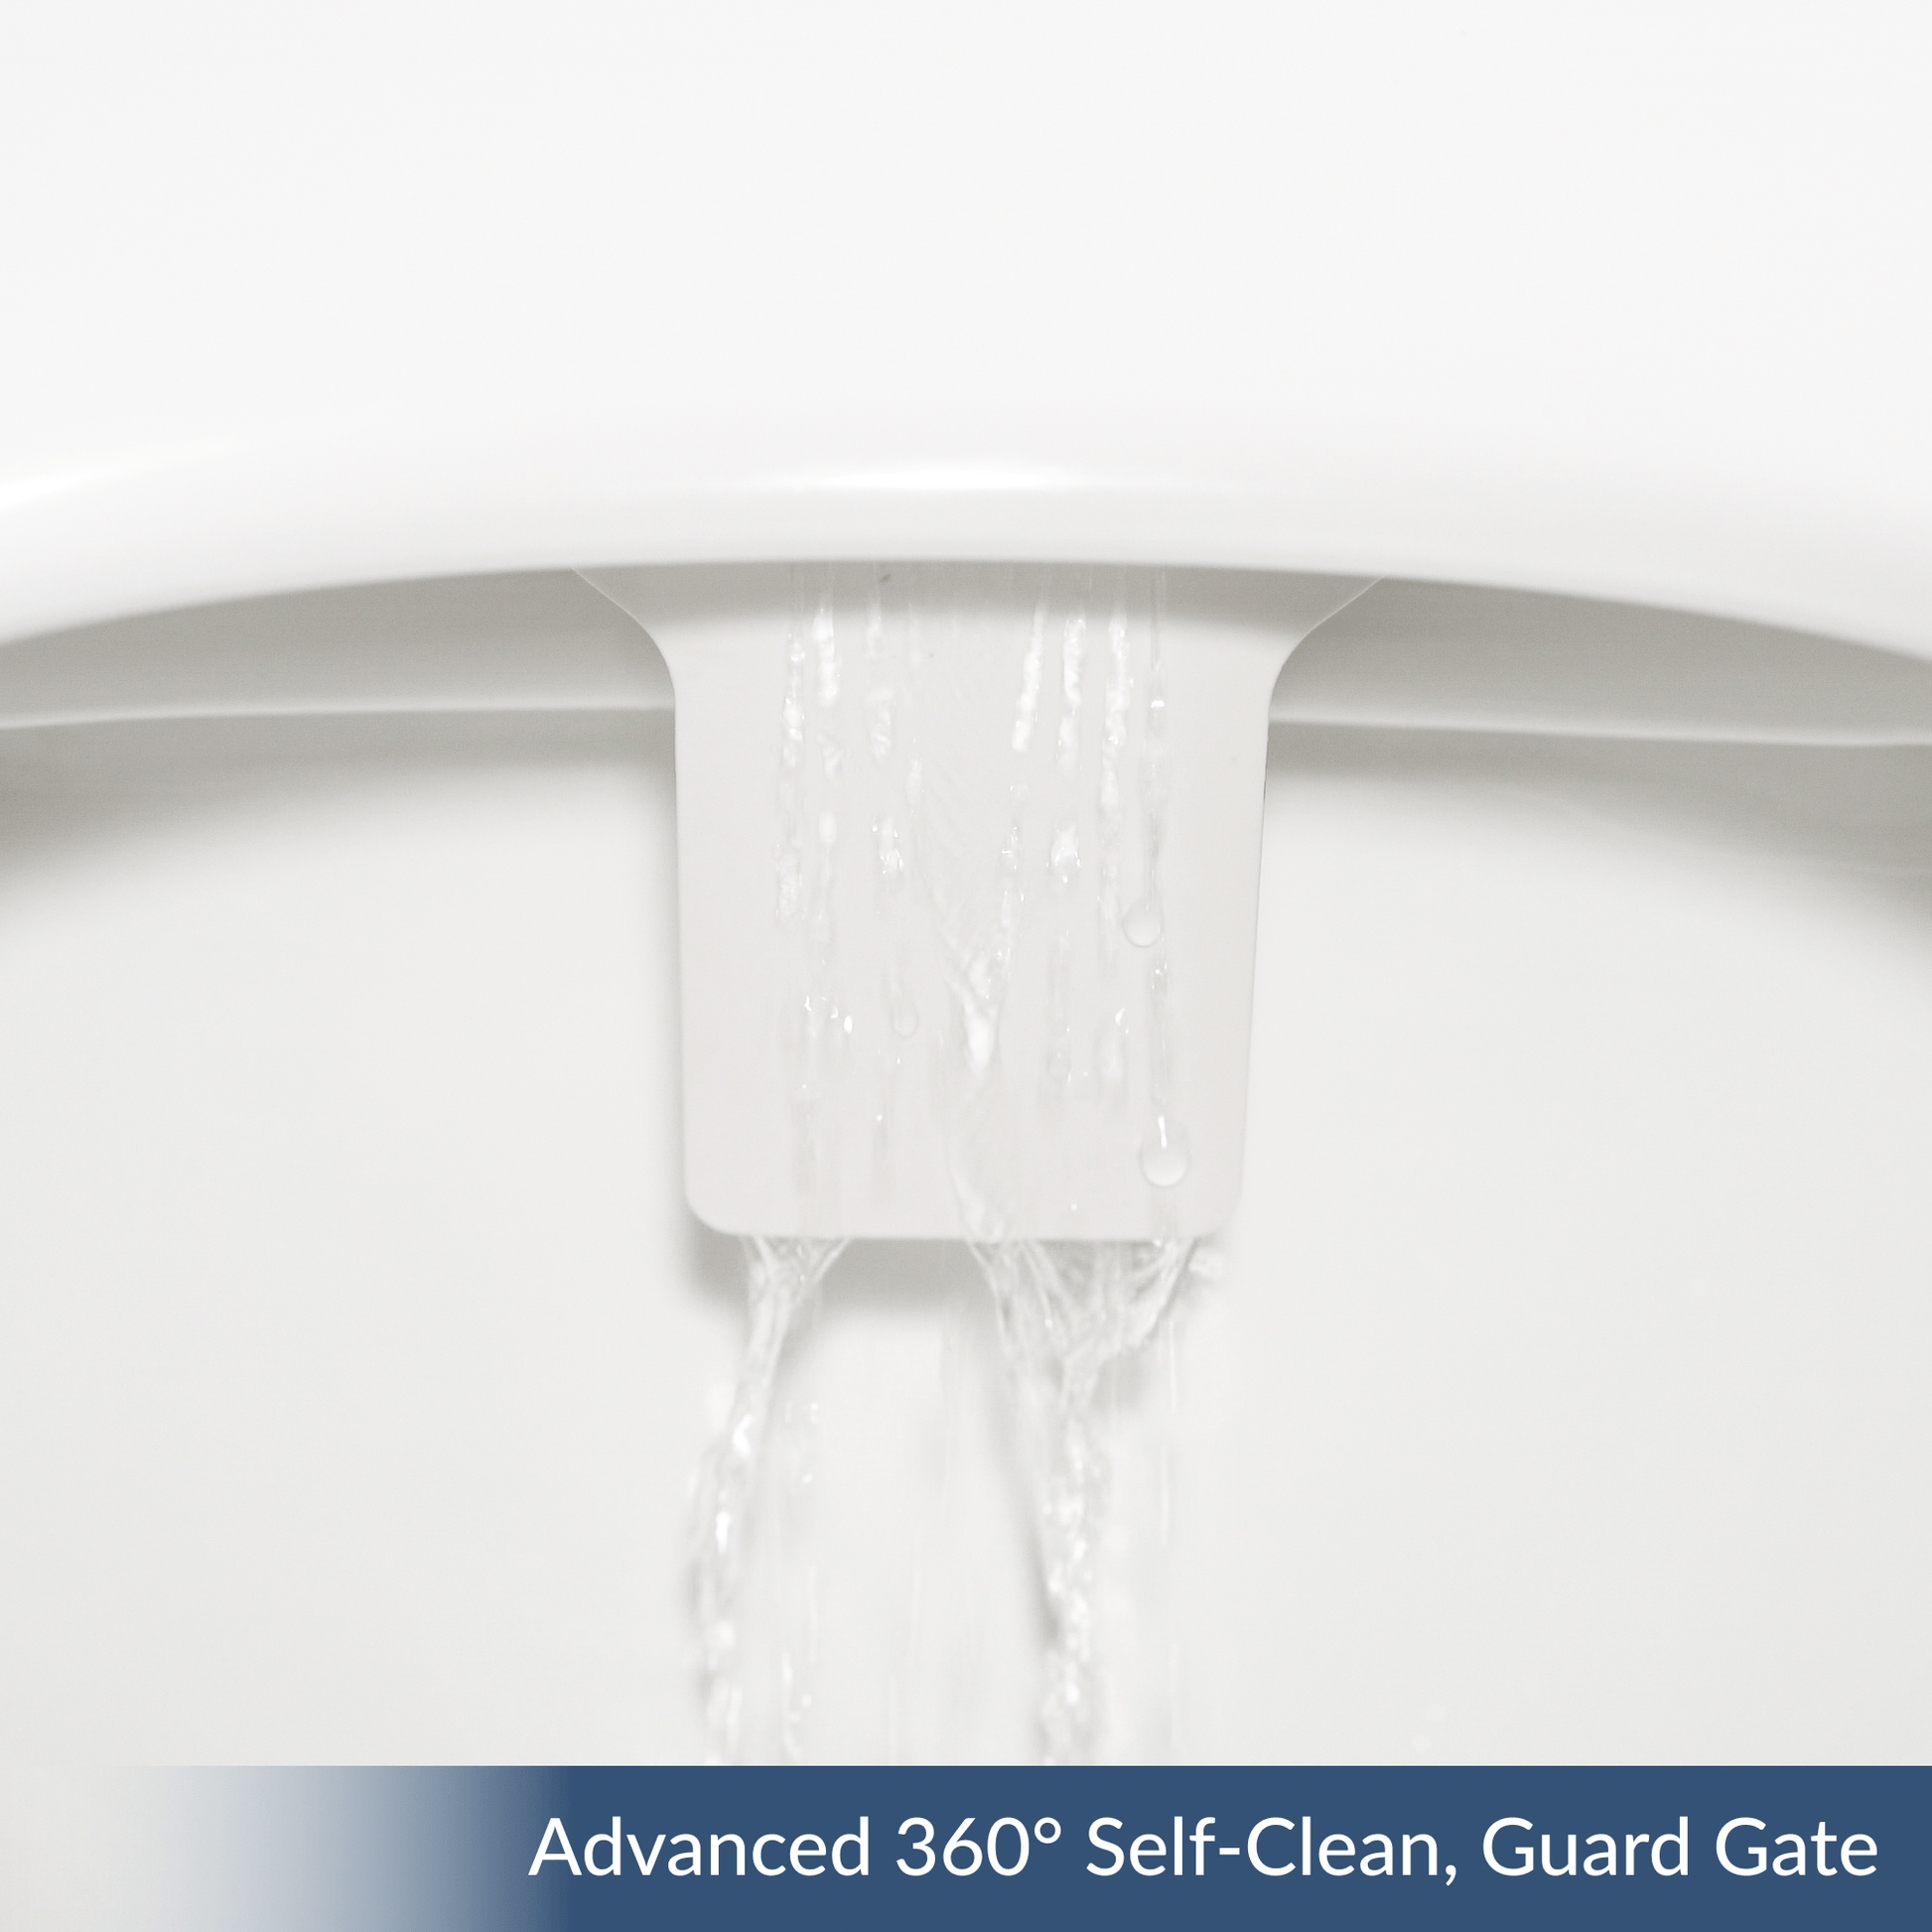 Advanced 360° Self-Clean feature of NEO Plus series running water down the guard gate to clean it